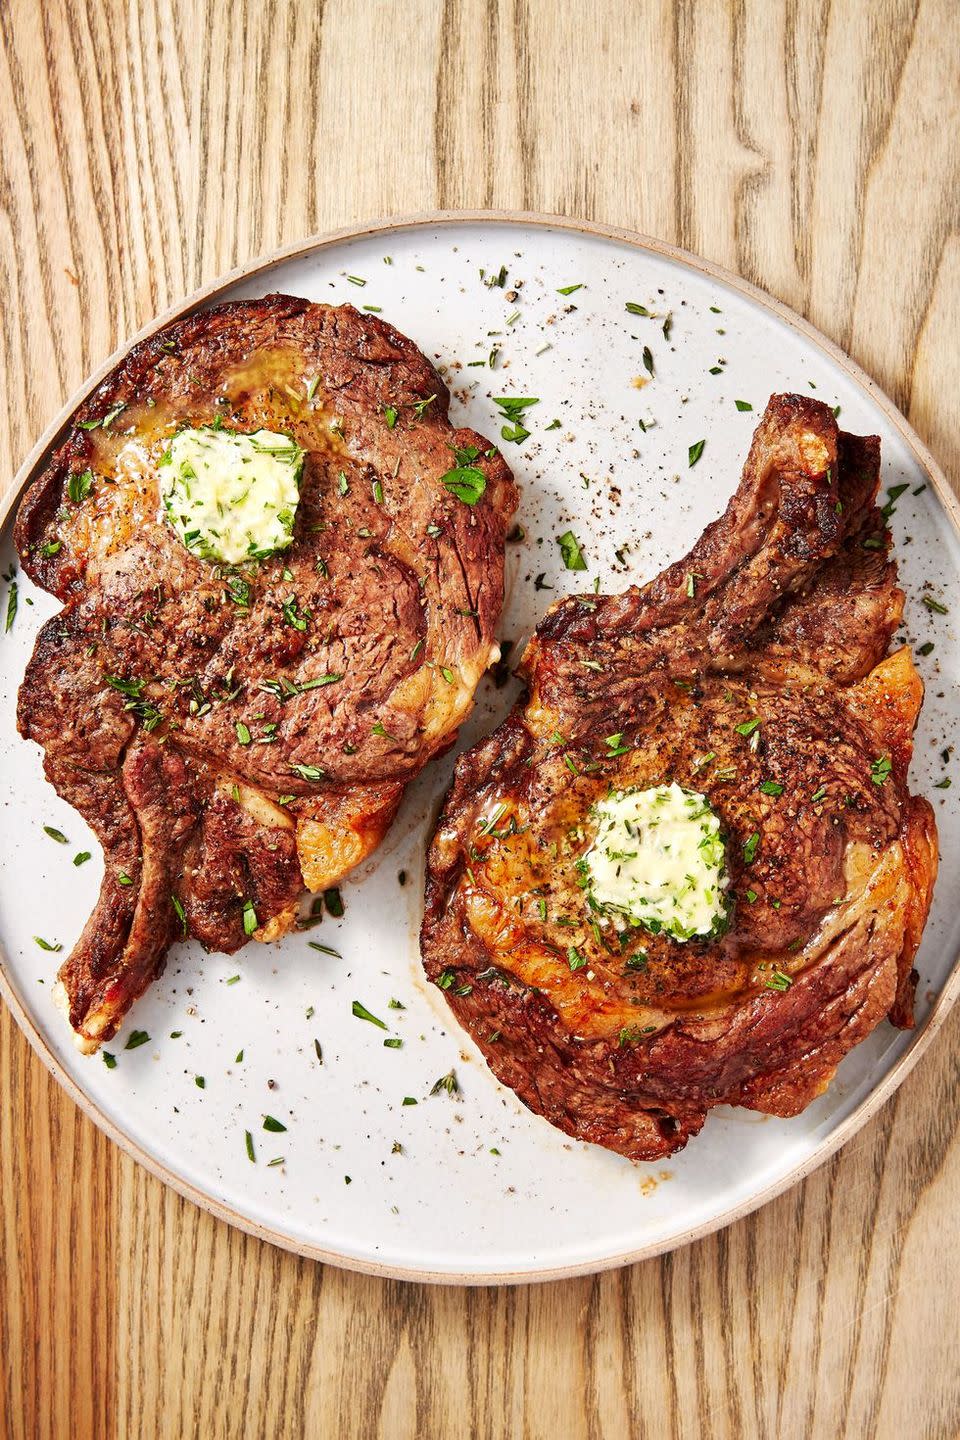 <p>A <a href="https://www.delish.com/uk/cooking/recipes/a30252481/how-to-pan-fry-steak/" rel="nofollow noopener" target="_blank" data-ylk="slk:perfectly seared steak" class="link ">perfectly seared steak</a> can seem like a daunting task. Getting the golden, crusty sear on the outside and trying not to overcook your steak can be difficult. </p><p>What if we told you that your air fryer can take all of that stress away? It's true! Leave it to the air fryer to cook a perfect piece of steak all without filling your kitchen with smoke or turning on the grill. As for the herb butter? It's not mandatory, but it sure is delicious. </p><p>Get the <a href="https://www.delish.com/uk/cooking/recipes/a32284104/air-fryer-steak-recipe/" rel="nofollow noopener" target="_blank" data-ylk="slk:Air Fryer Steak" class="link ">Air Fryer Steak</a> recipe.</p>